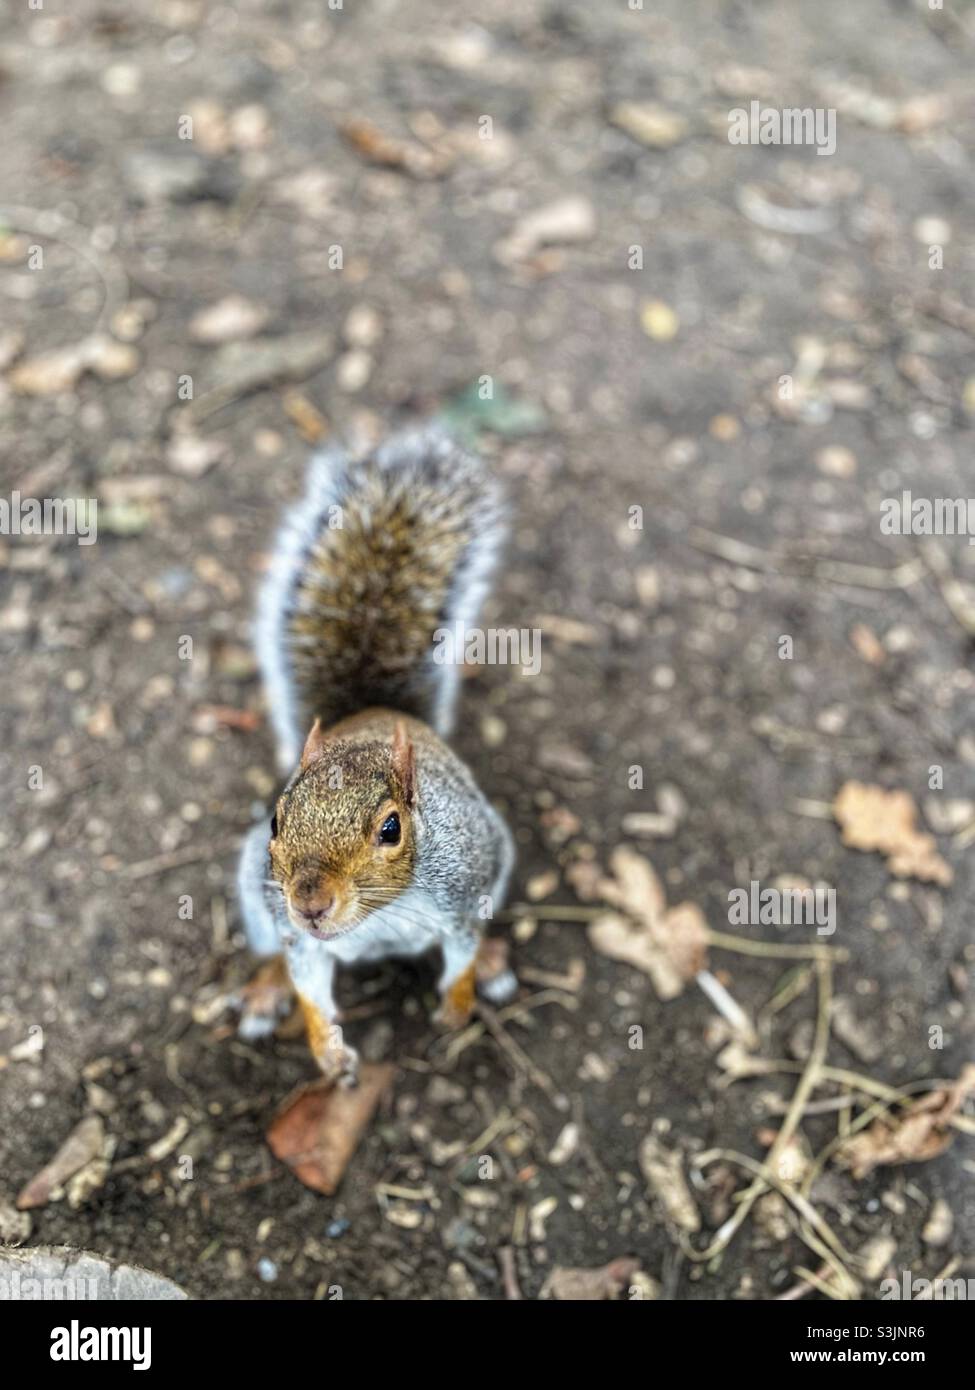 A grey squirrel in London, England Stock Photo